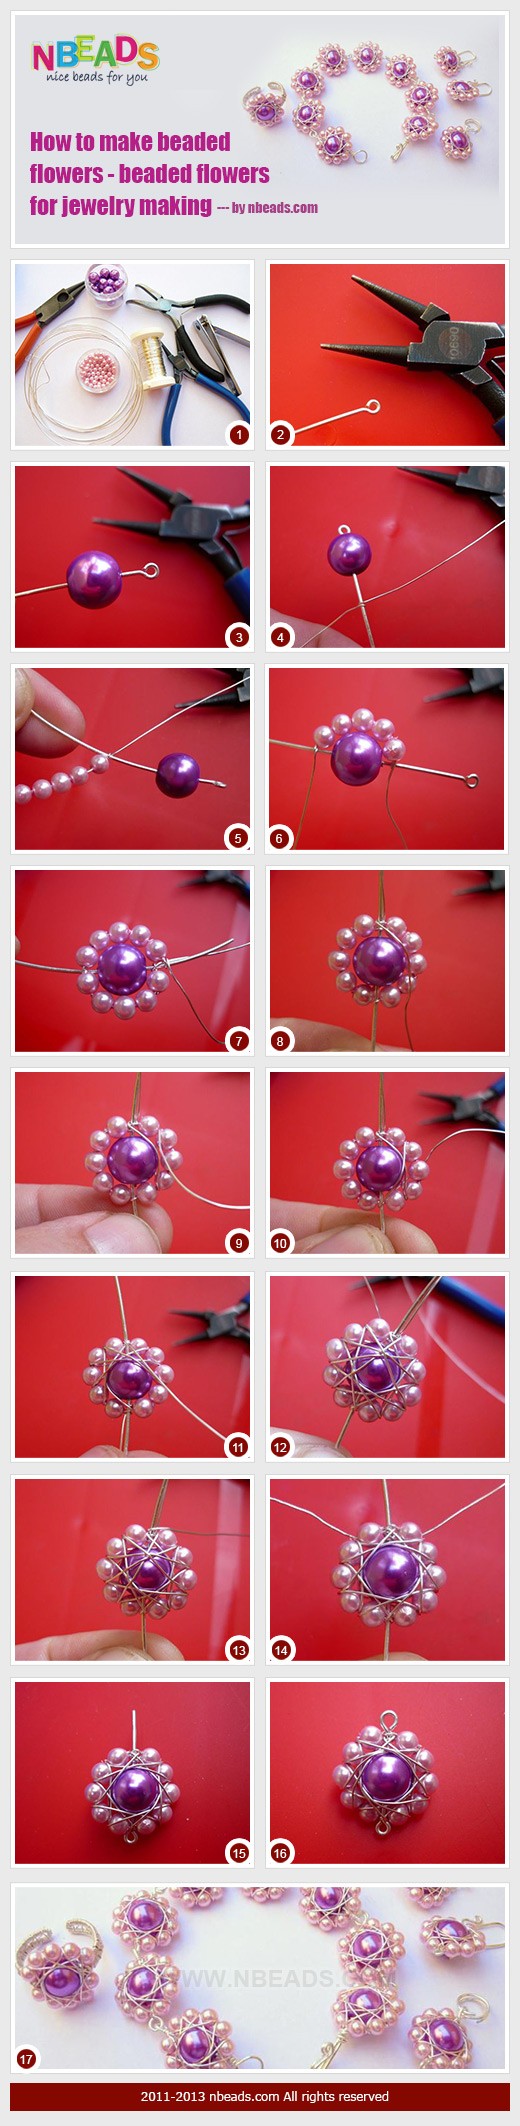 how to make beaded flowers - beaded flowers for jewelry making